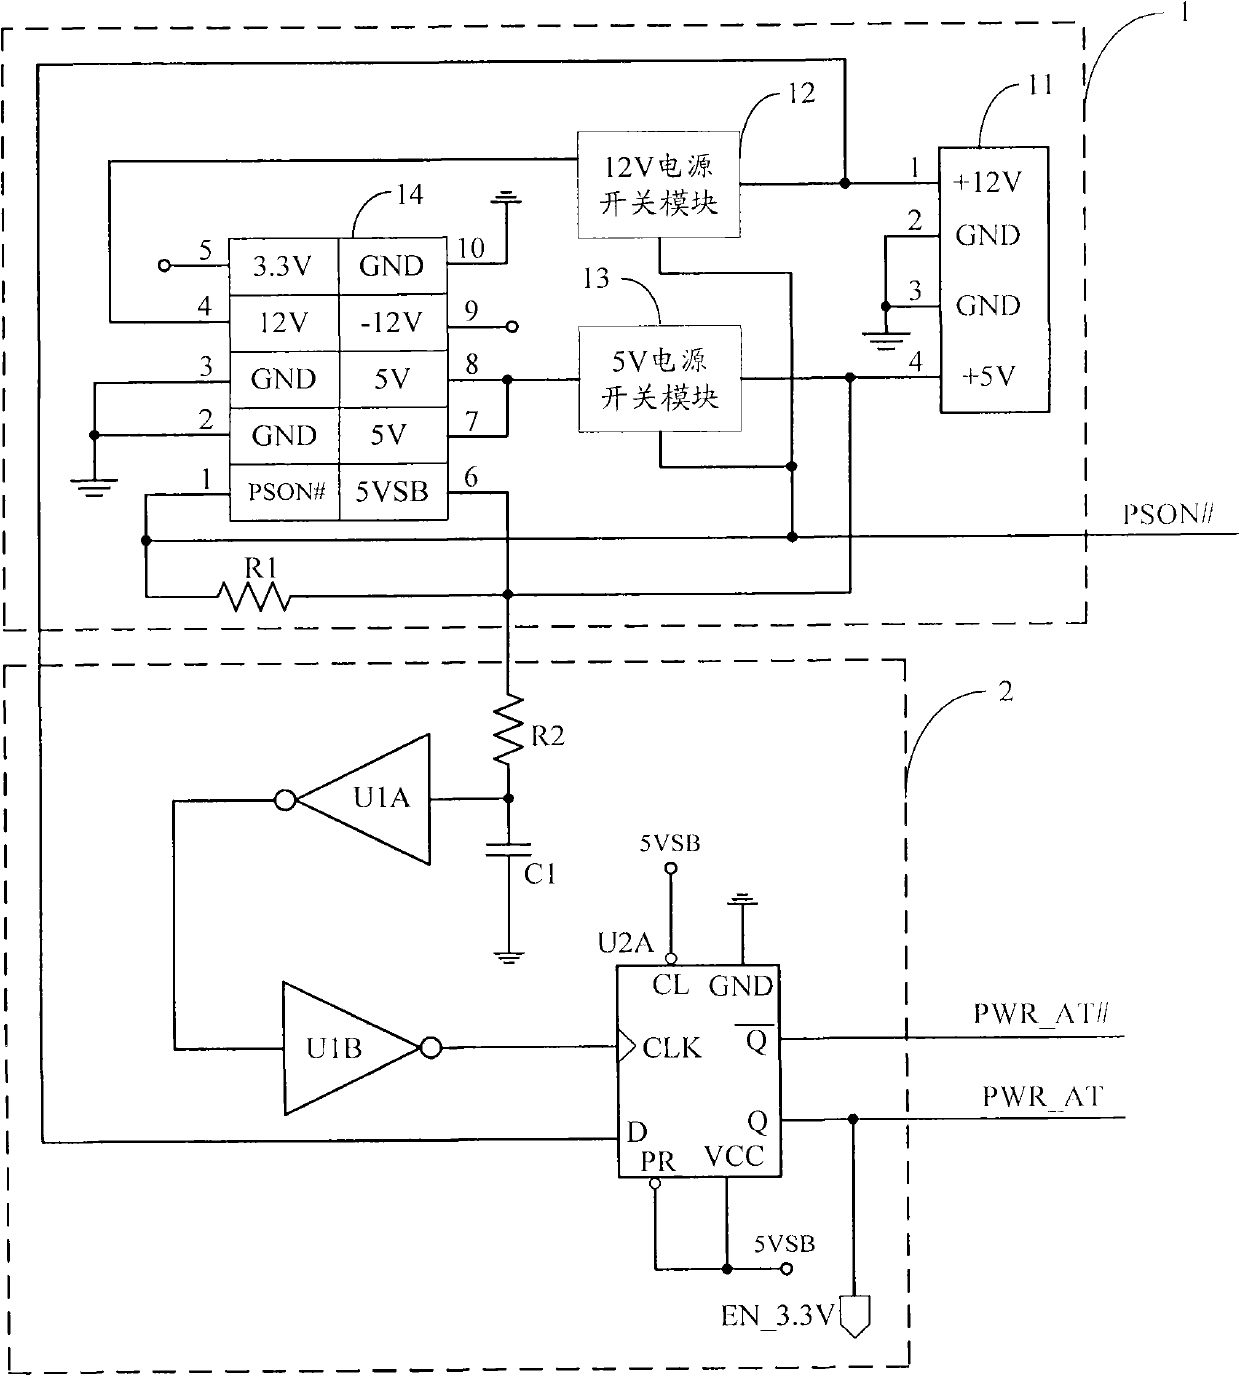 Starting-up circuit compatible with ATX (Advanced Technology Extended) power supply and AT (Advanced Technology) power supply and computer